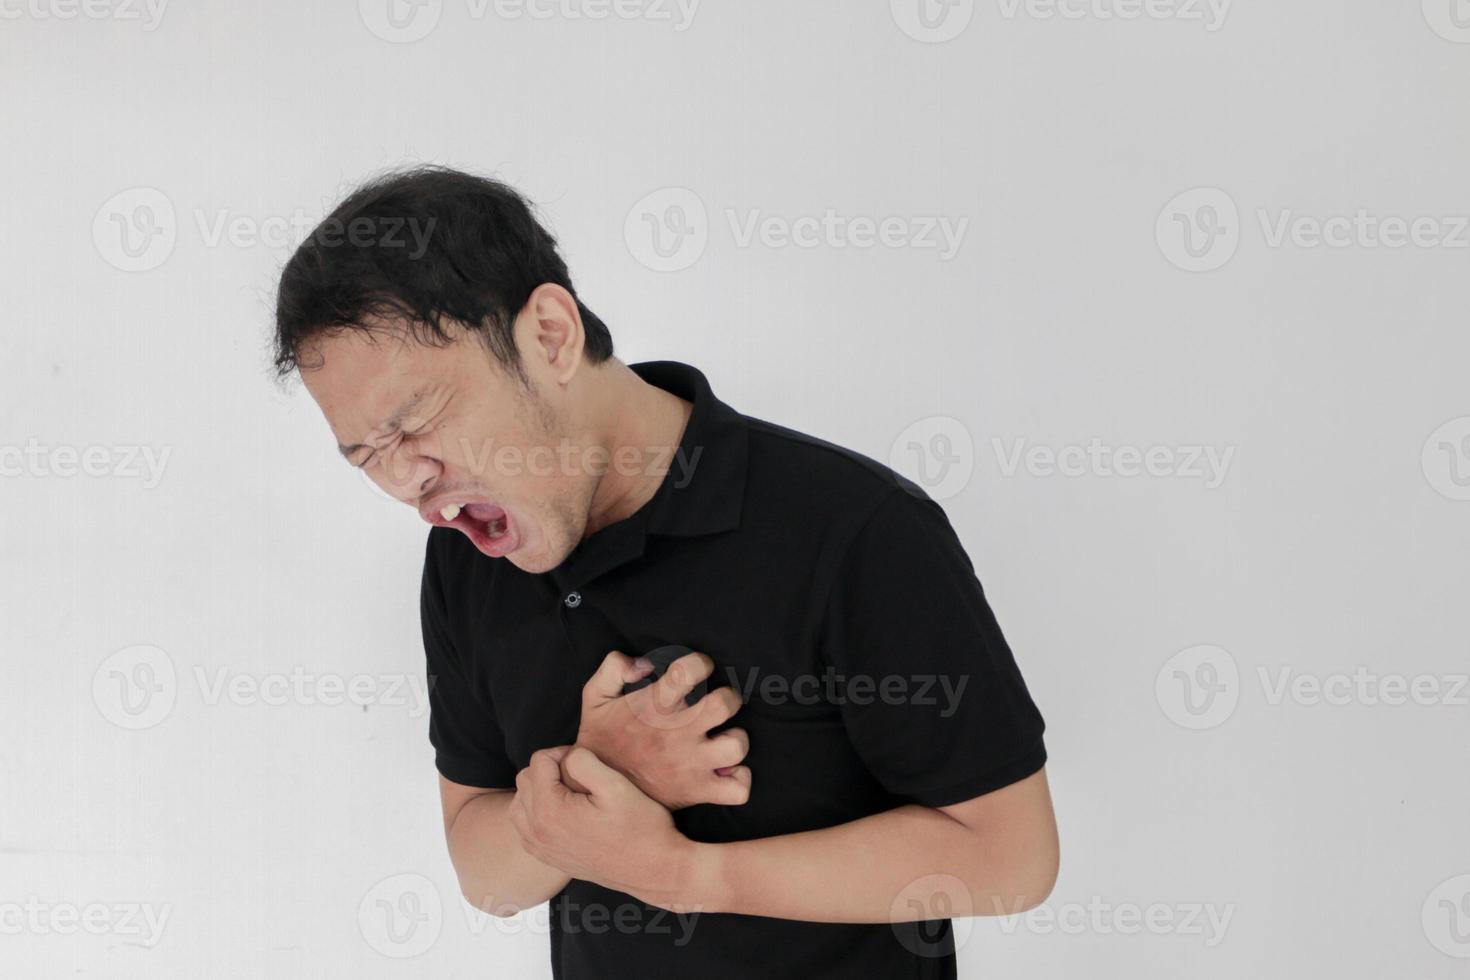 Heart attack or broken heart of young asian man with hurt emotion wear black shirt photo